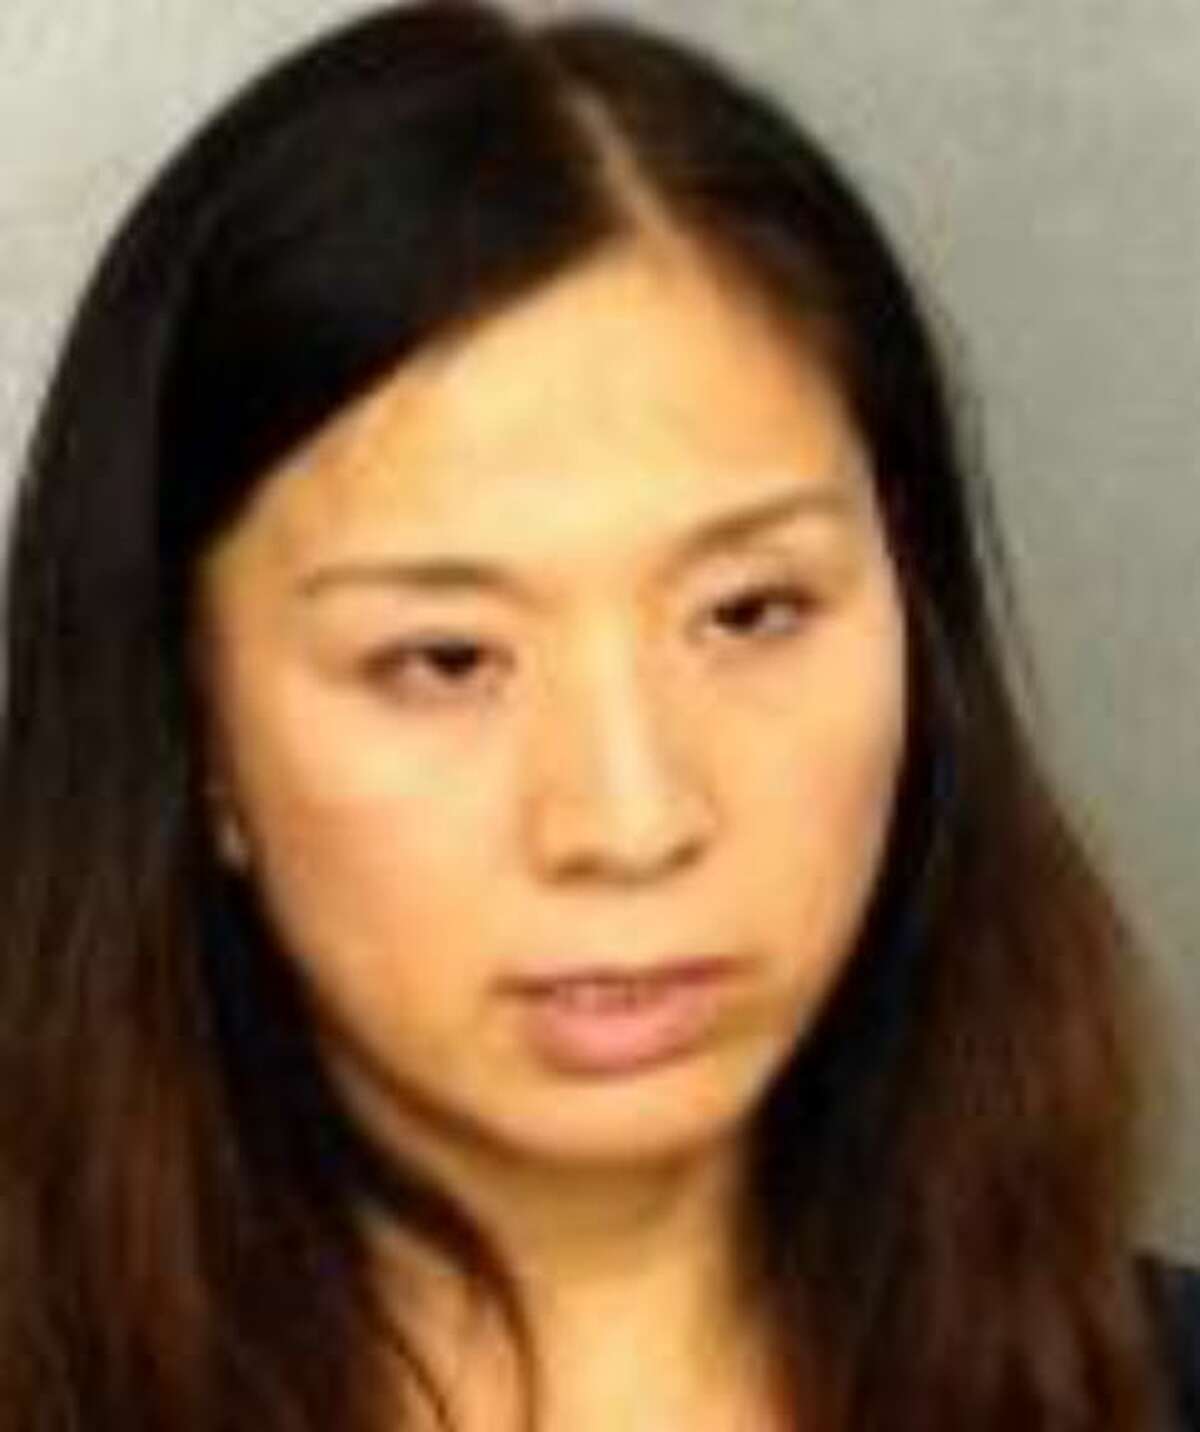 The Hollywood Police Department in Hollywood, Florida arrested Xiaojing Cao for soliciting for prostitution at Ting Ting Spa.